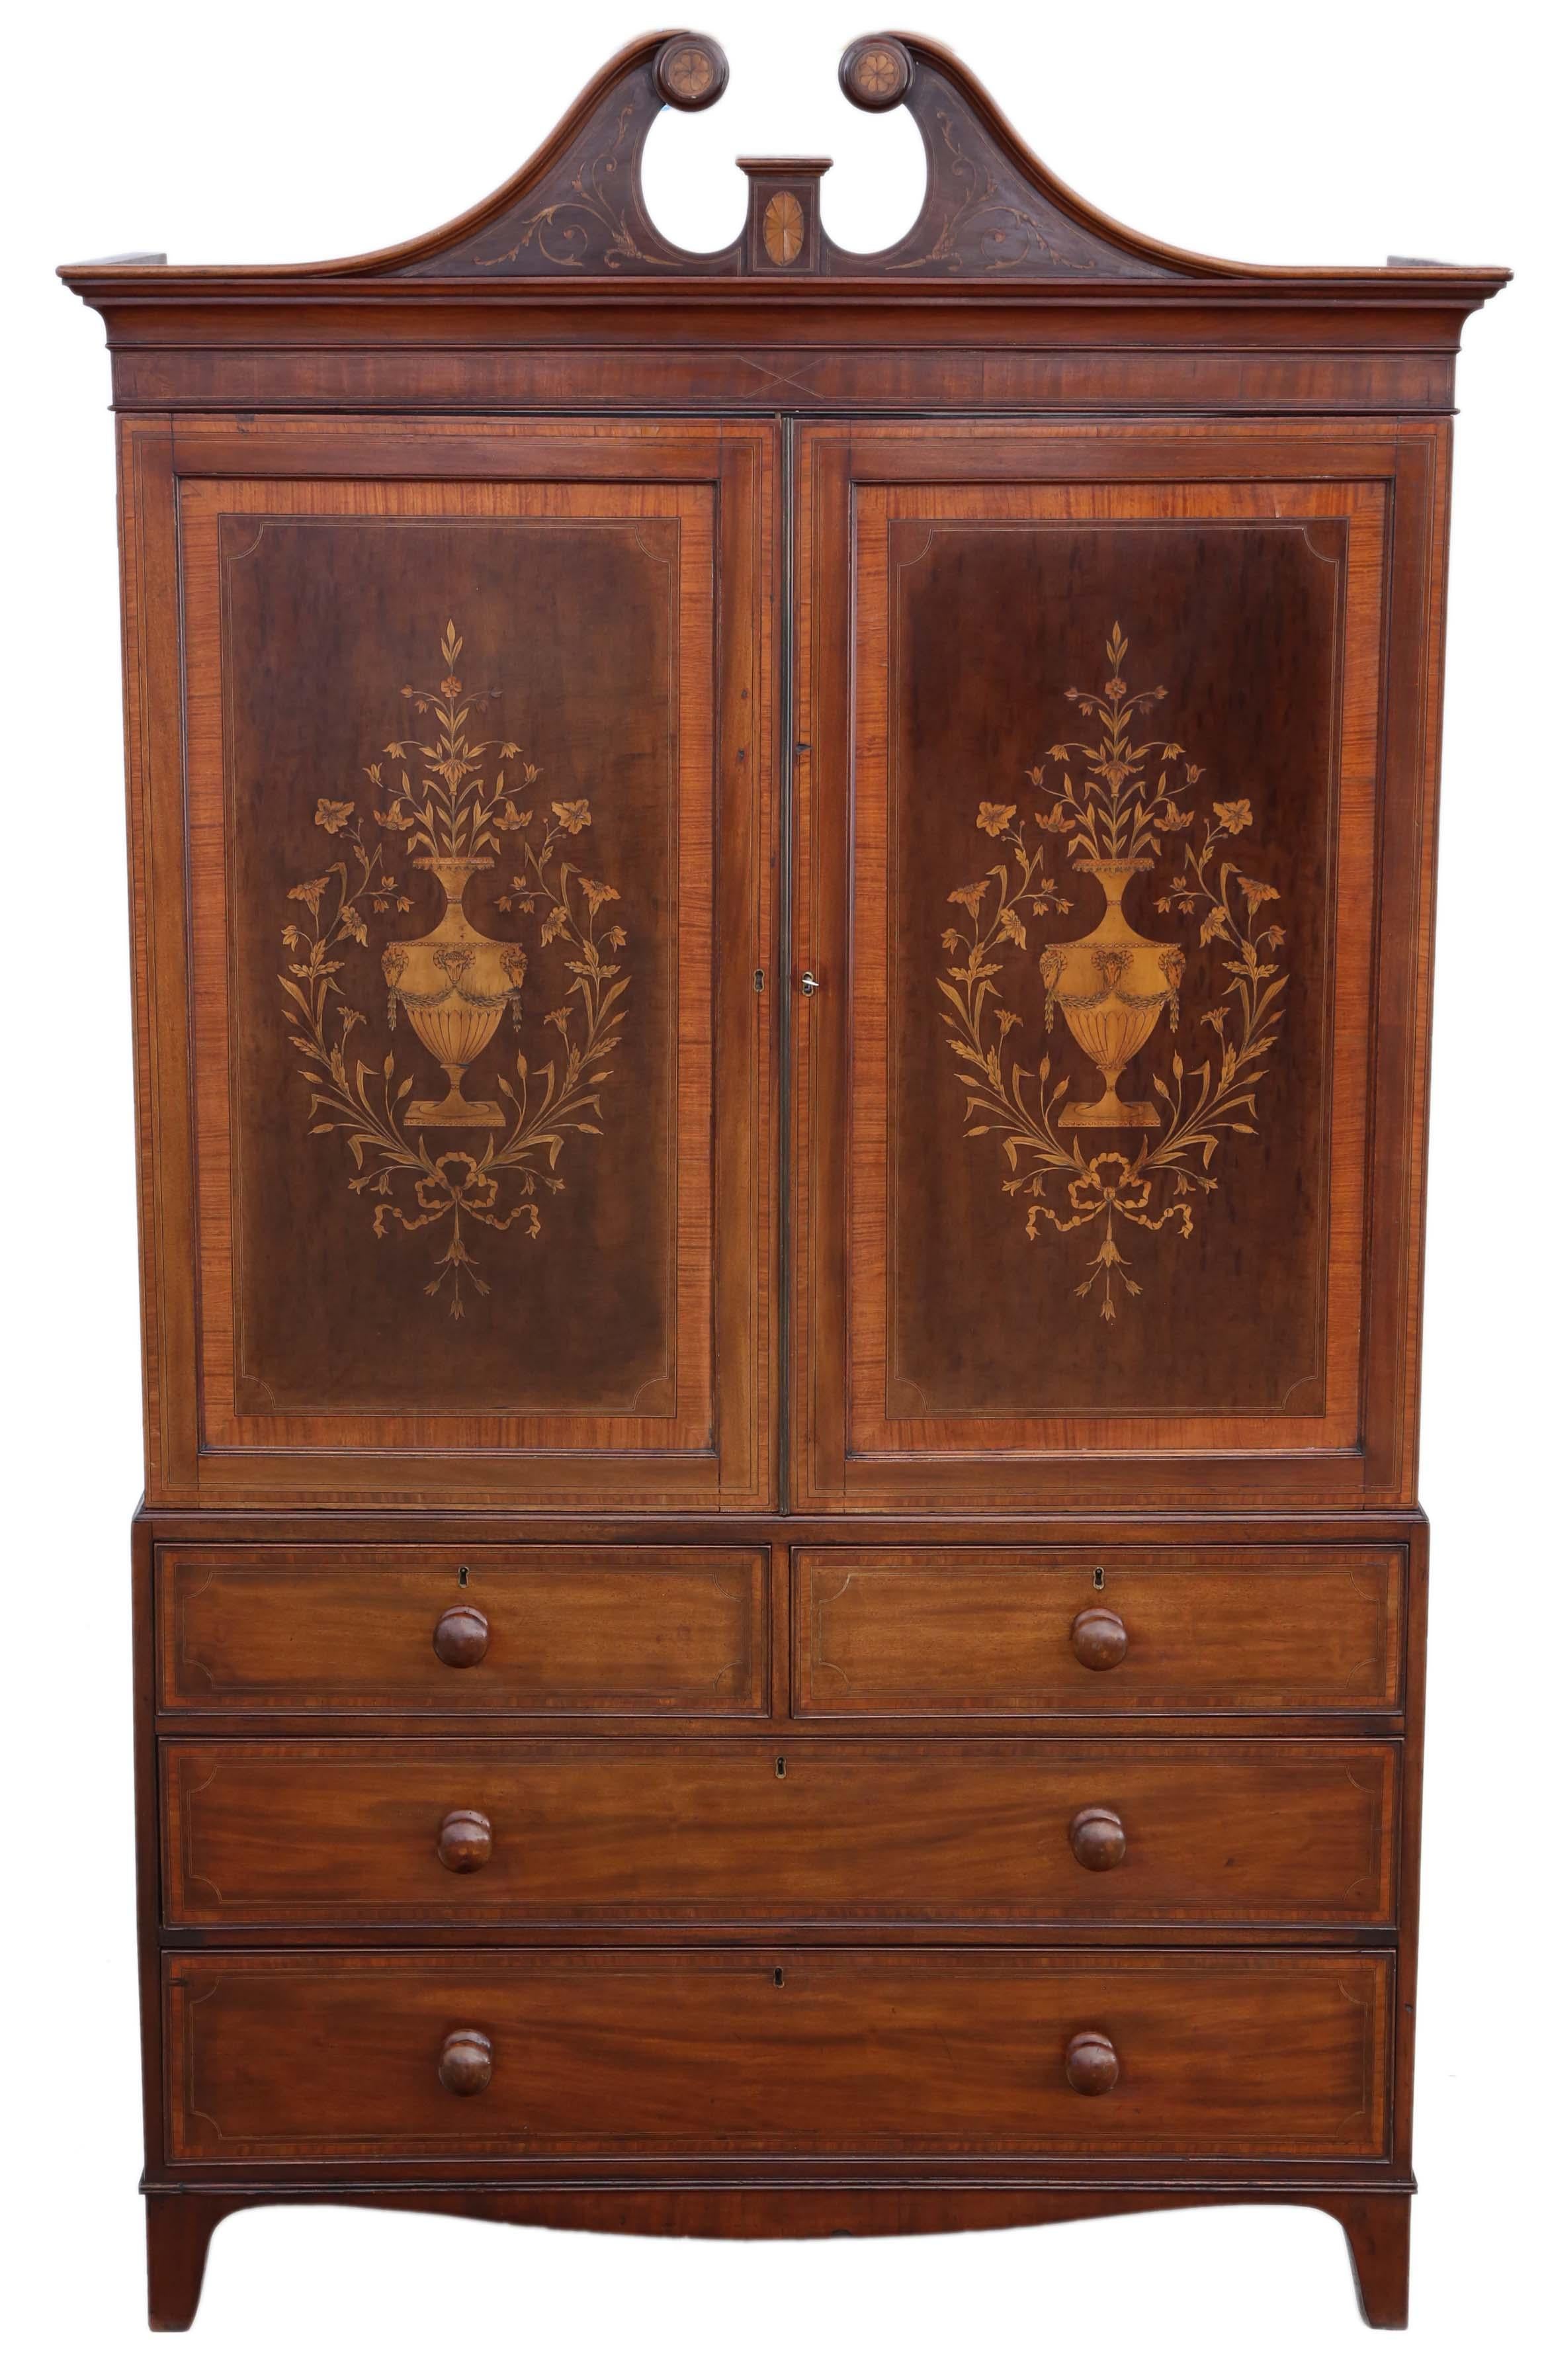 European Antique Fine Quality 19th Century Marquetry Linen Press by Edwards and Roberts